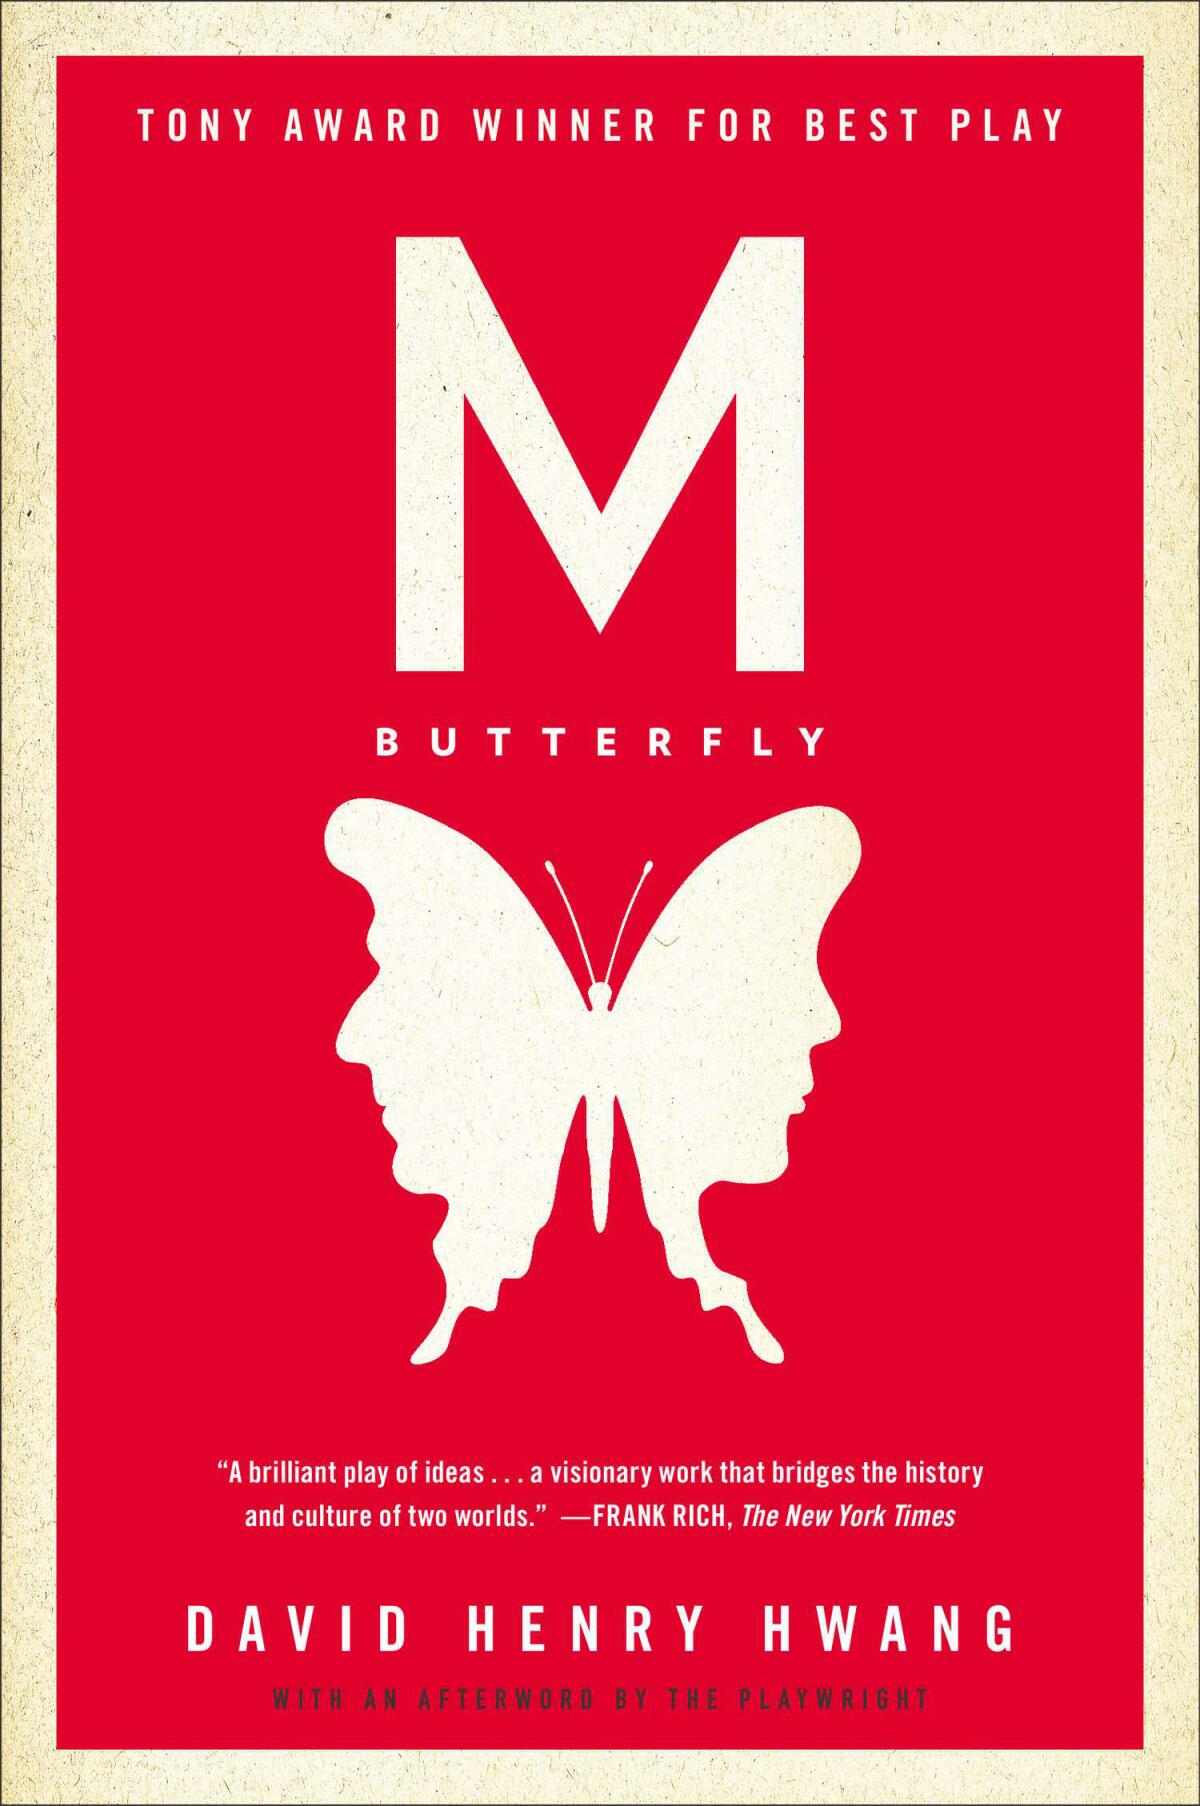 Book jacket for "M. Butterfly" by David Henry Hwang